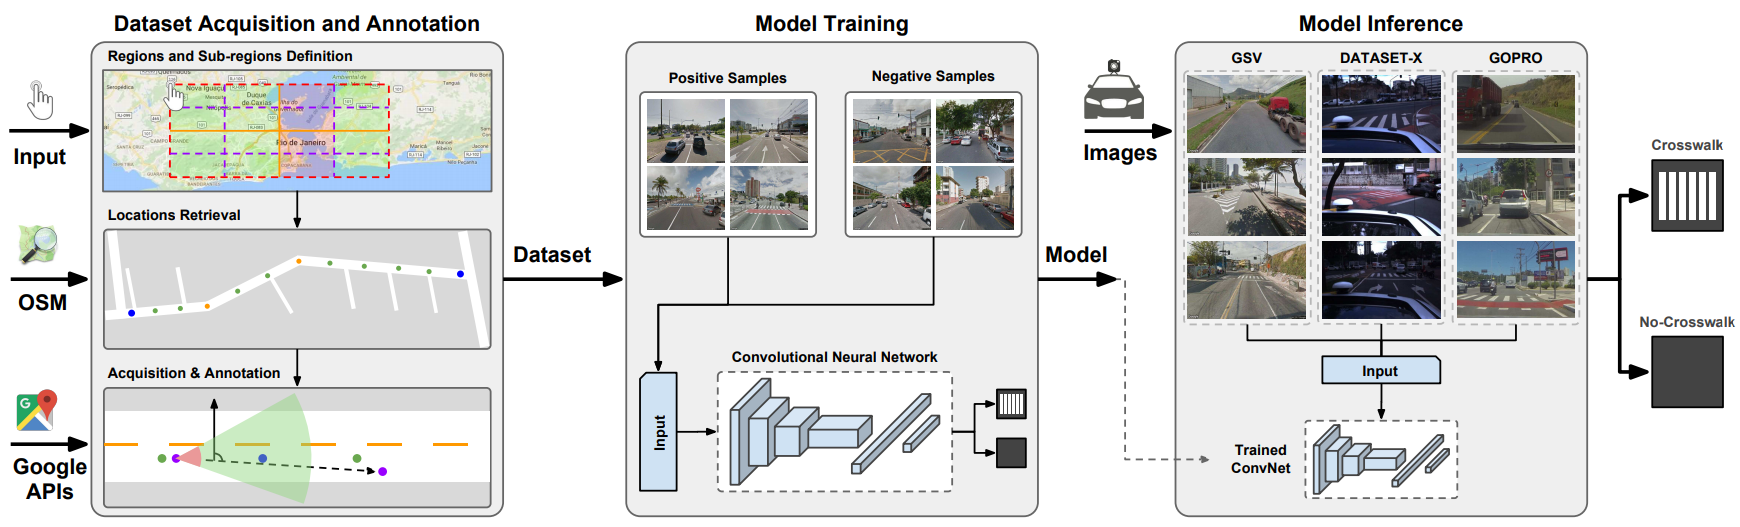 Automatic Large-Scale Data Acquisition via Crowdsourcing for Crosswalk Classification: A Deep Learning Approach